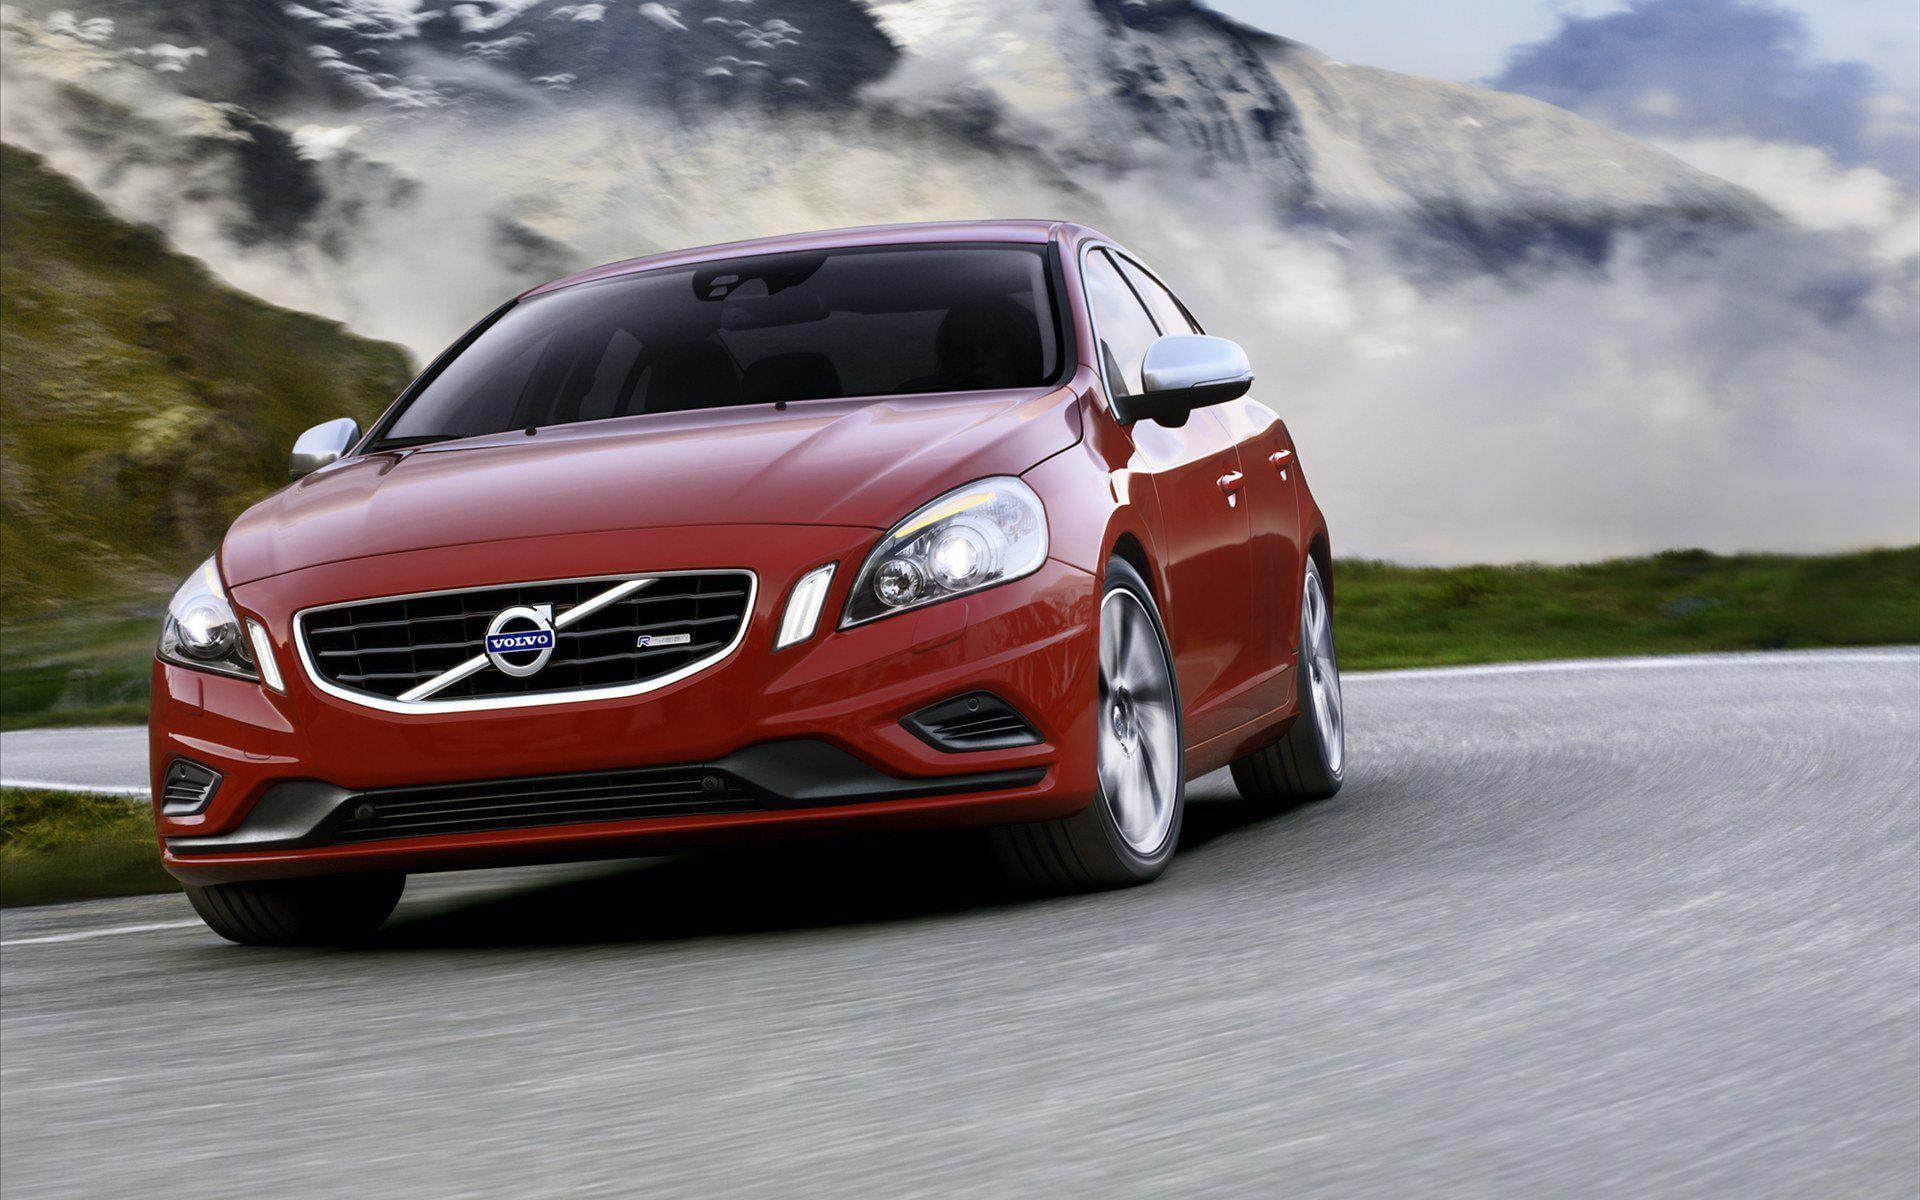 2012 Volvo S60, red car, cars, 1920x1200